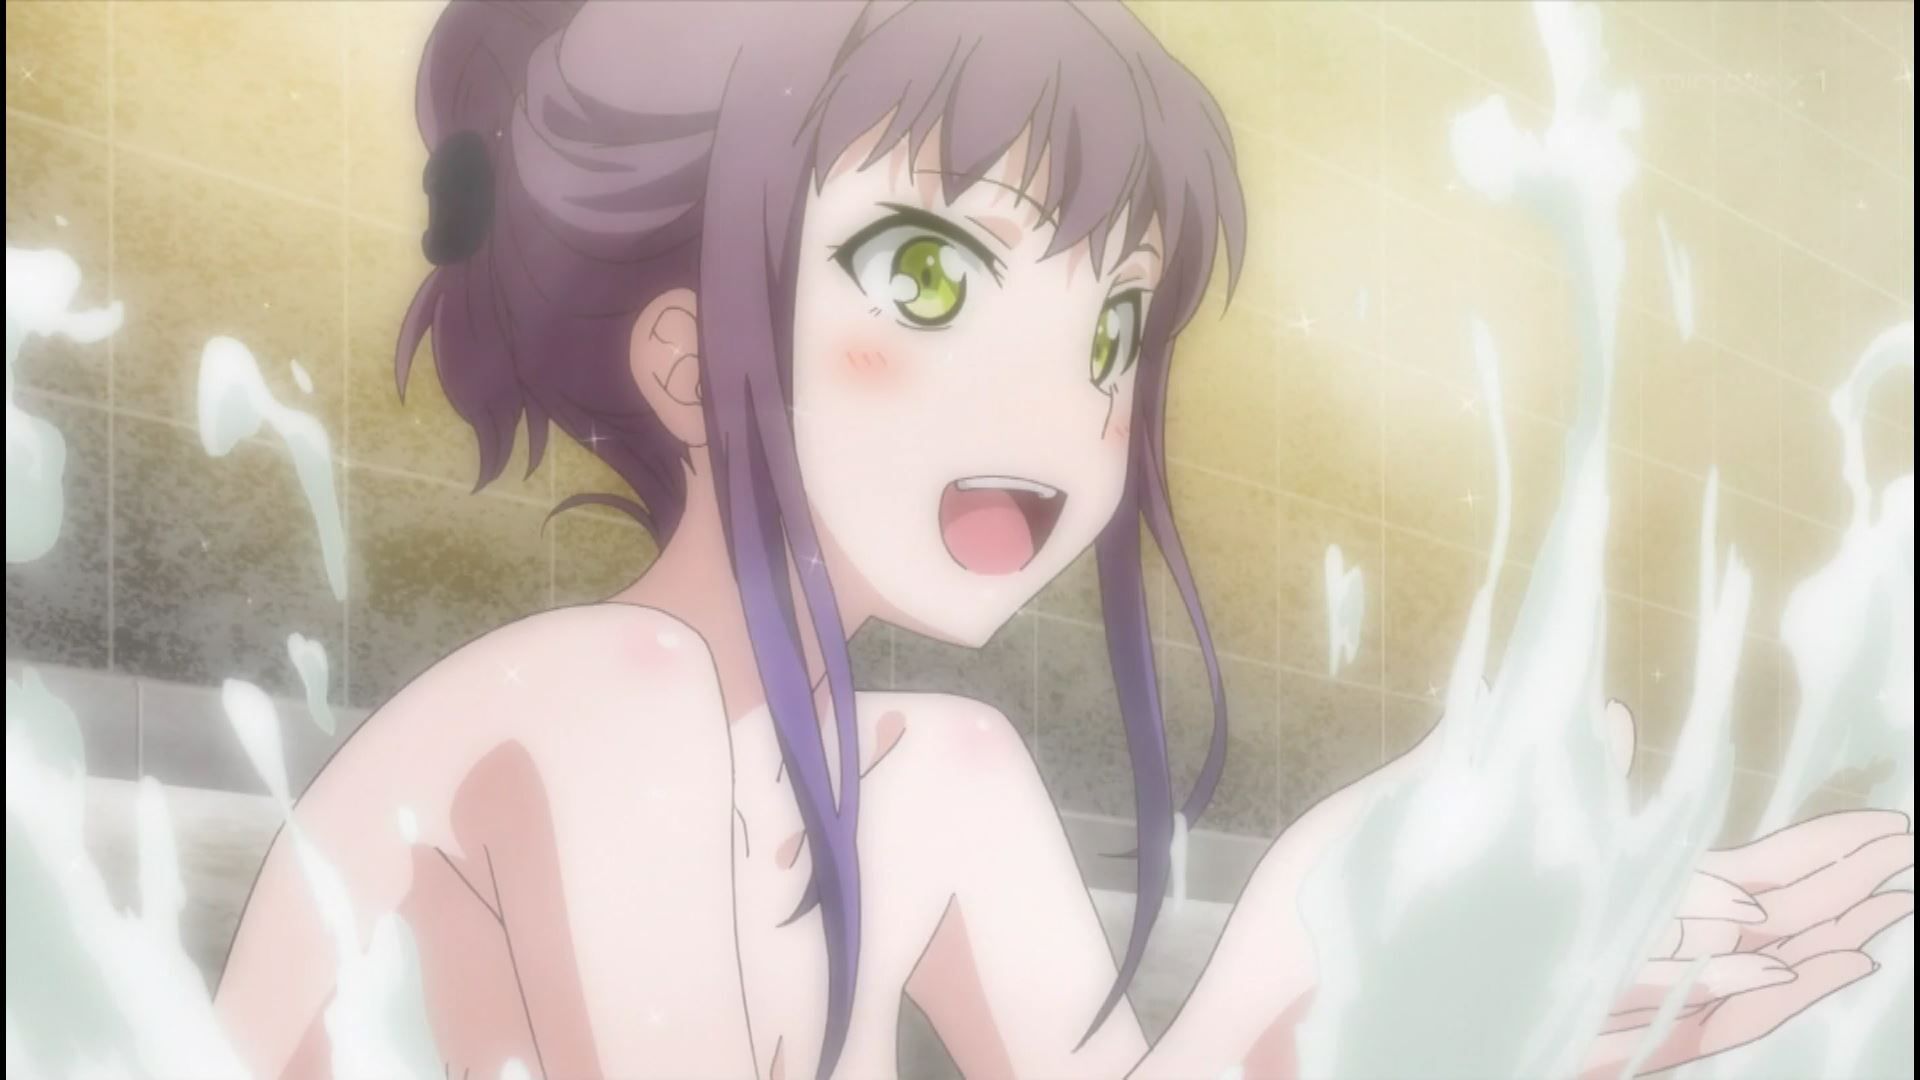 Anime [Armored Daughter Fighting Machine] 7 stories such as hot spring bathing scene where girls' nakedness is not glowing! 17